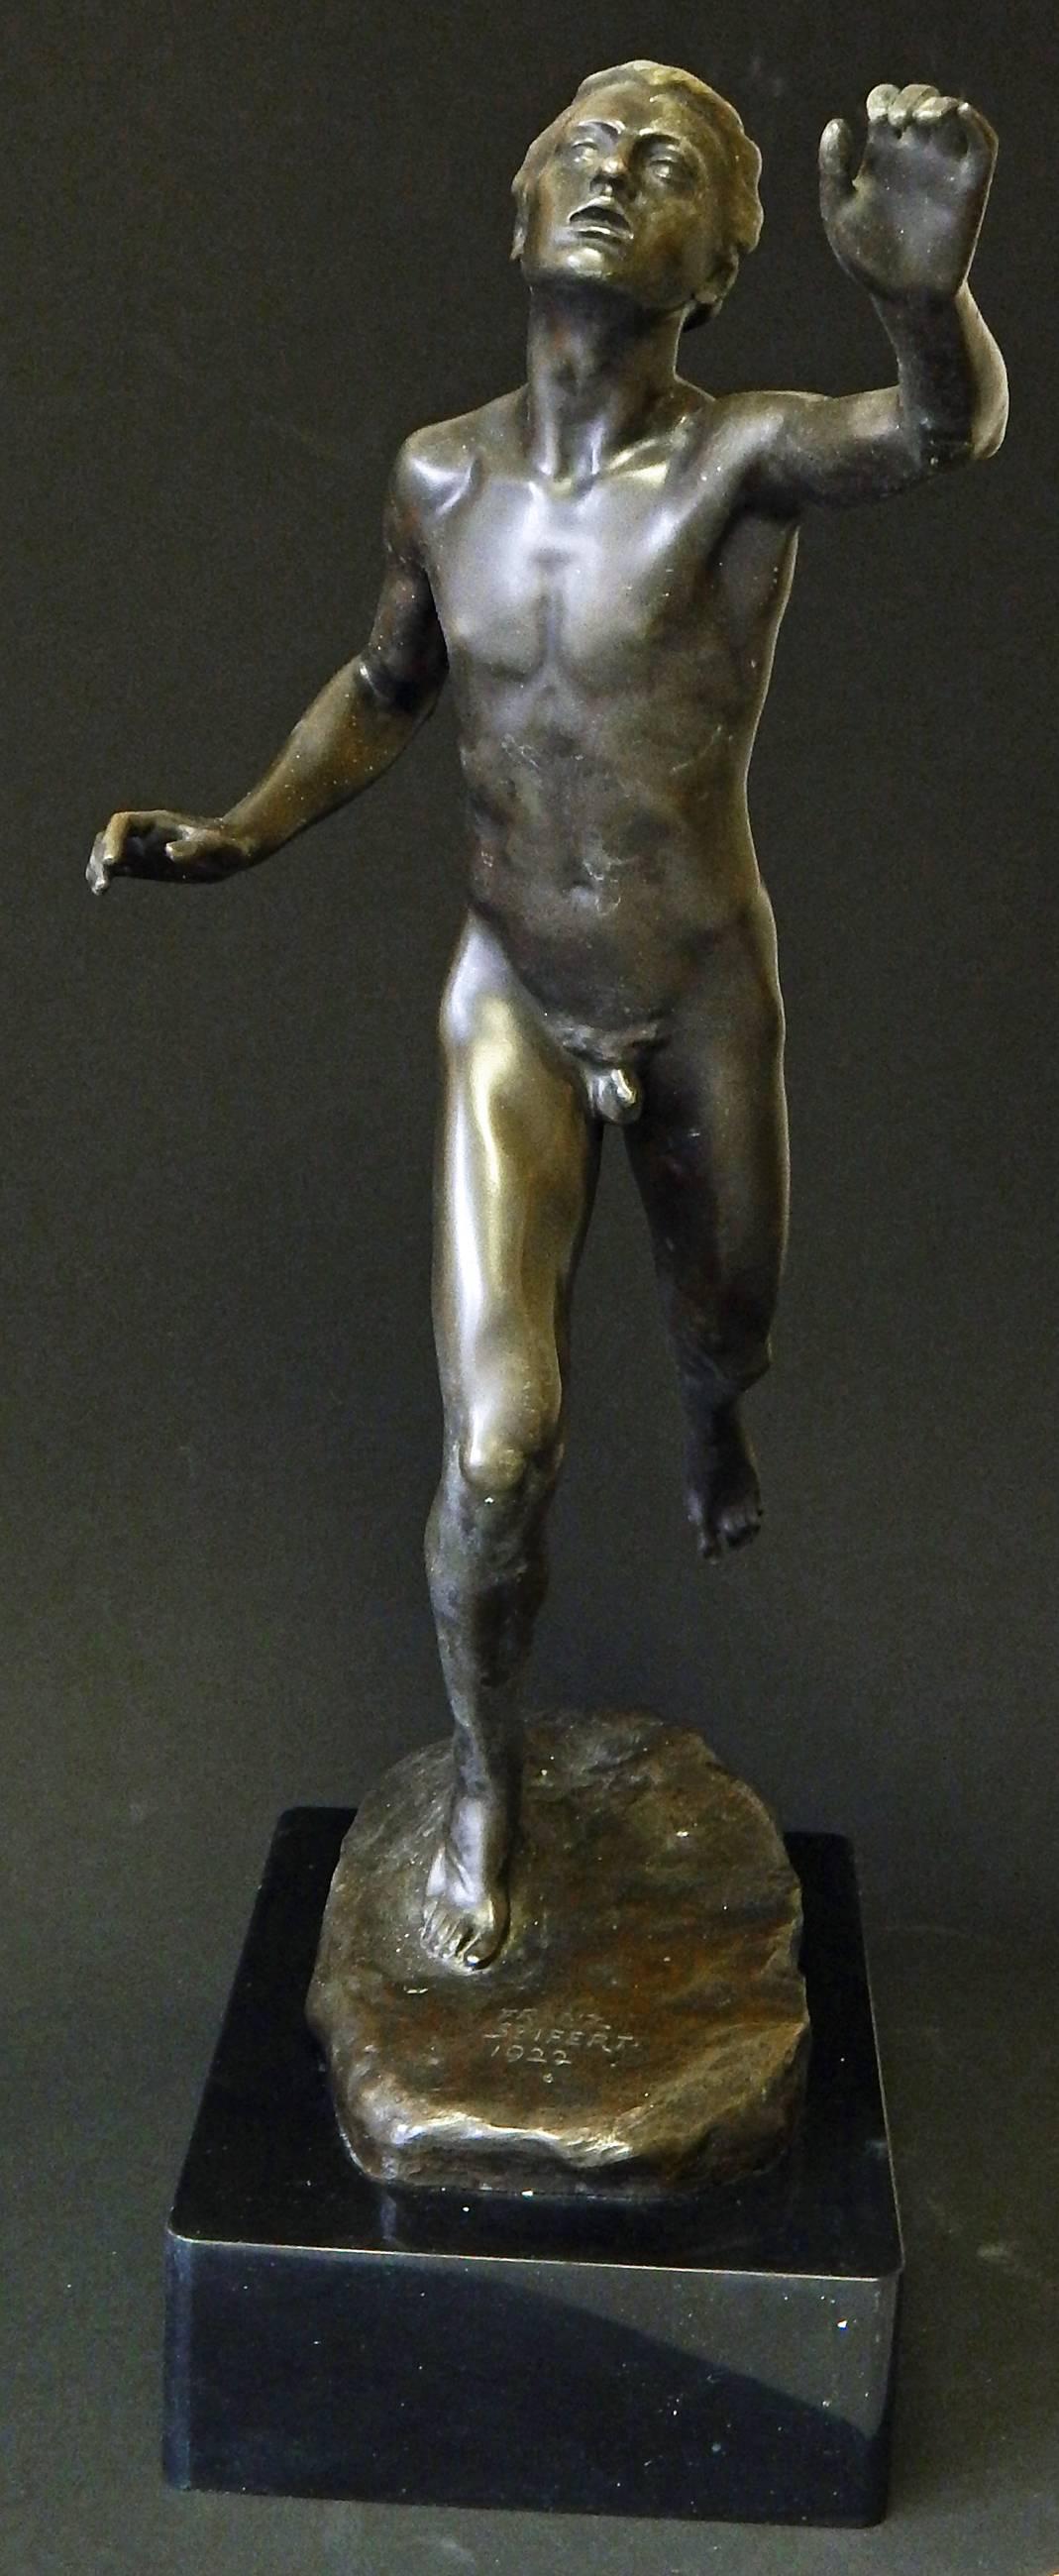 Sculpted as European artists were moving from Beaux Arts realism to a more stylized modern approach to the figure, which we now call Art Deco, this large and rare bronze depicts a nude male runner in full stride. Here there is none of the drapery